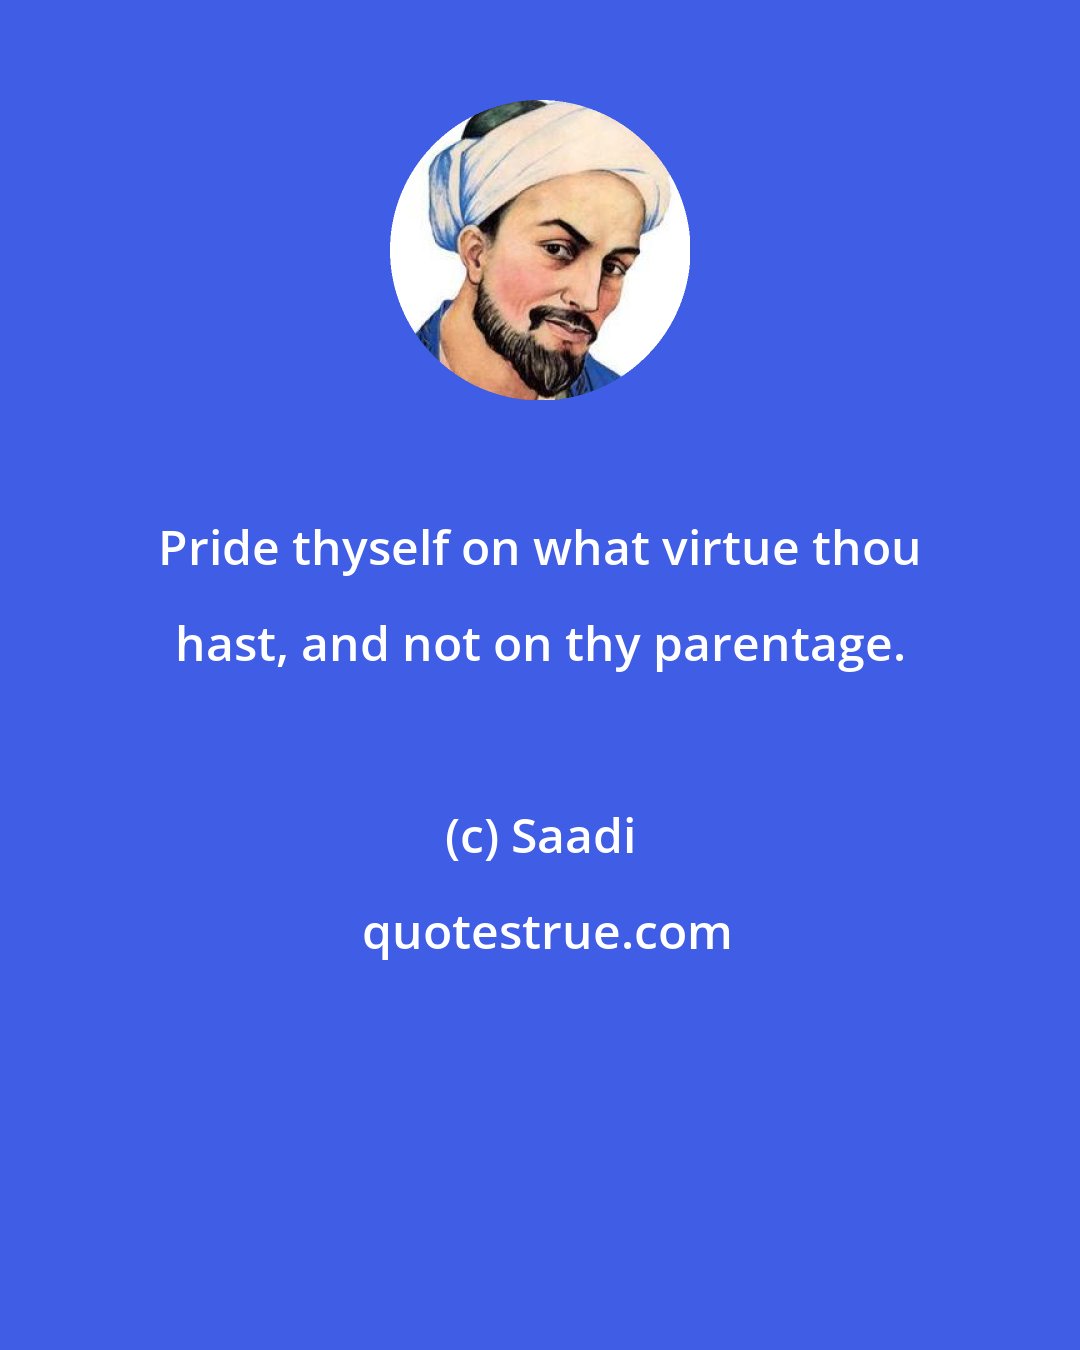 Saadi: Pride thyself on what virtue thou hast, and not on thy parentage.